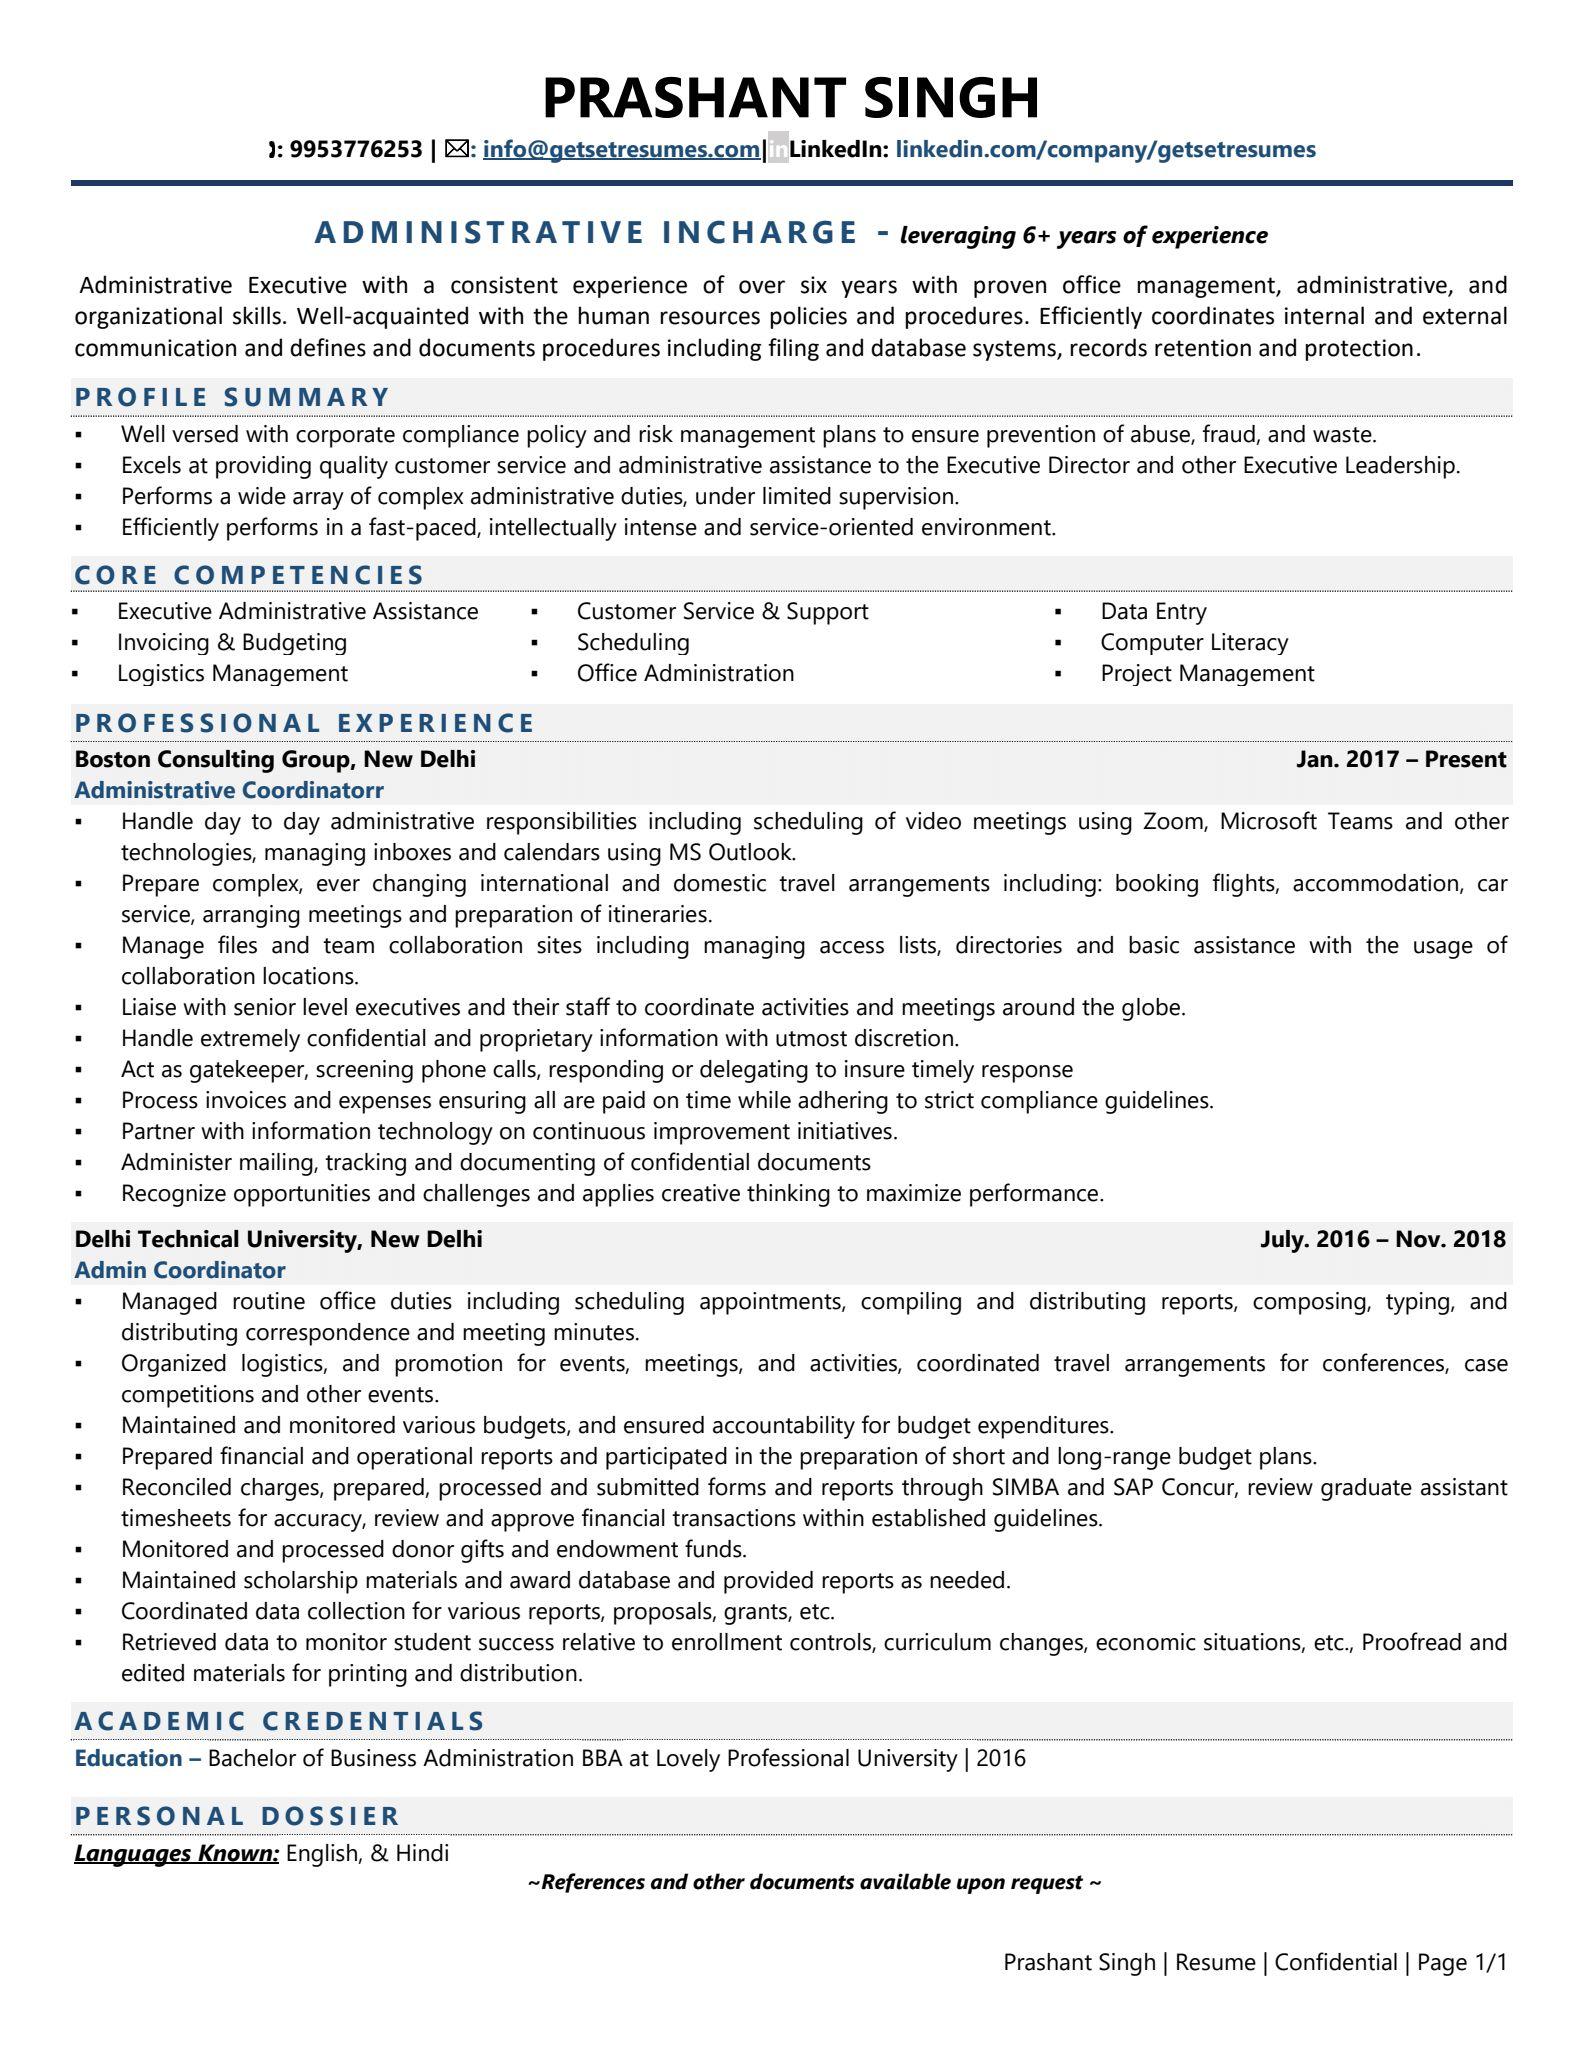 Administrative Incharge - Resume Example & Template